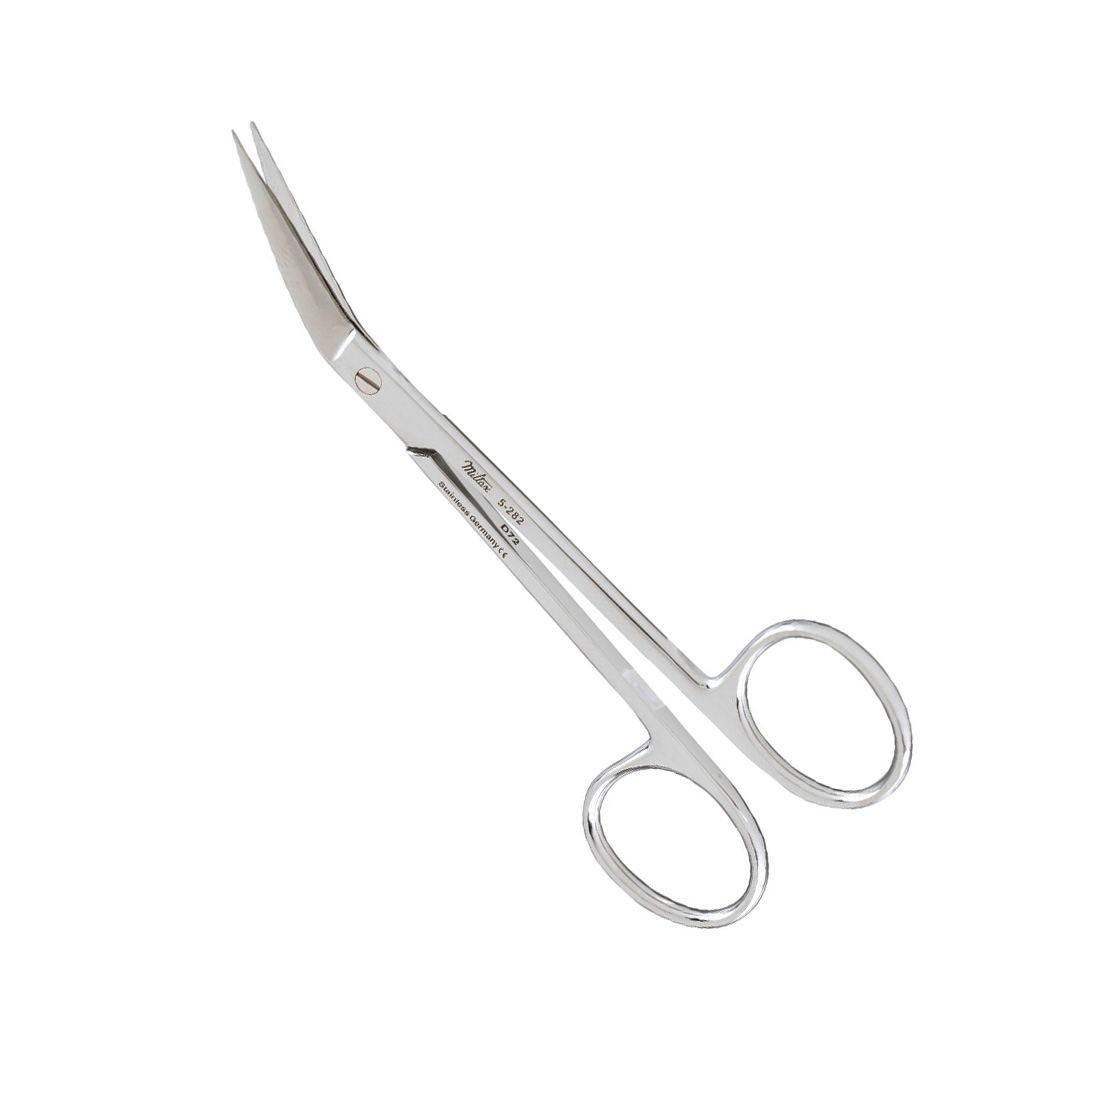 Wagner Plastic Surgery Scissors, Straight, Sharp-Blunt Points, Angled Blades